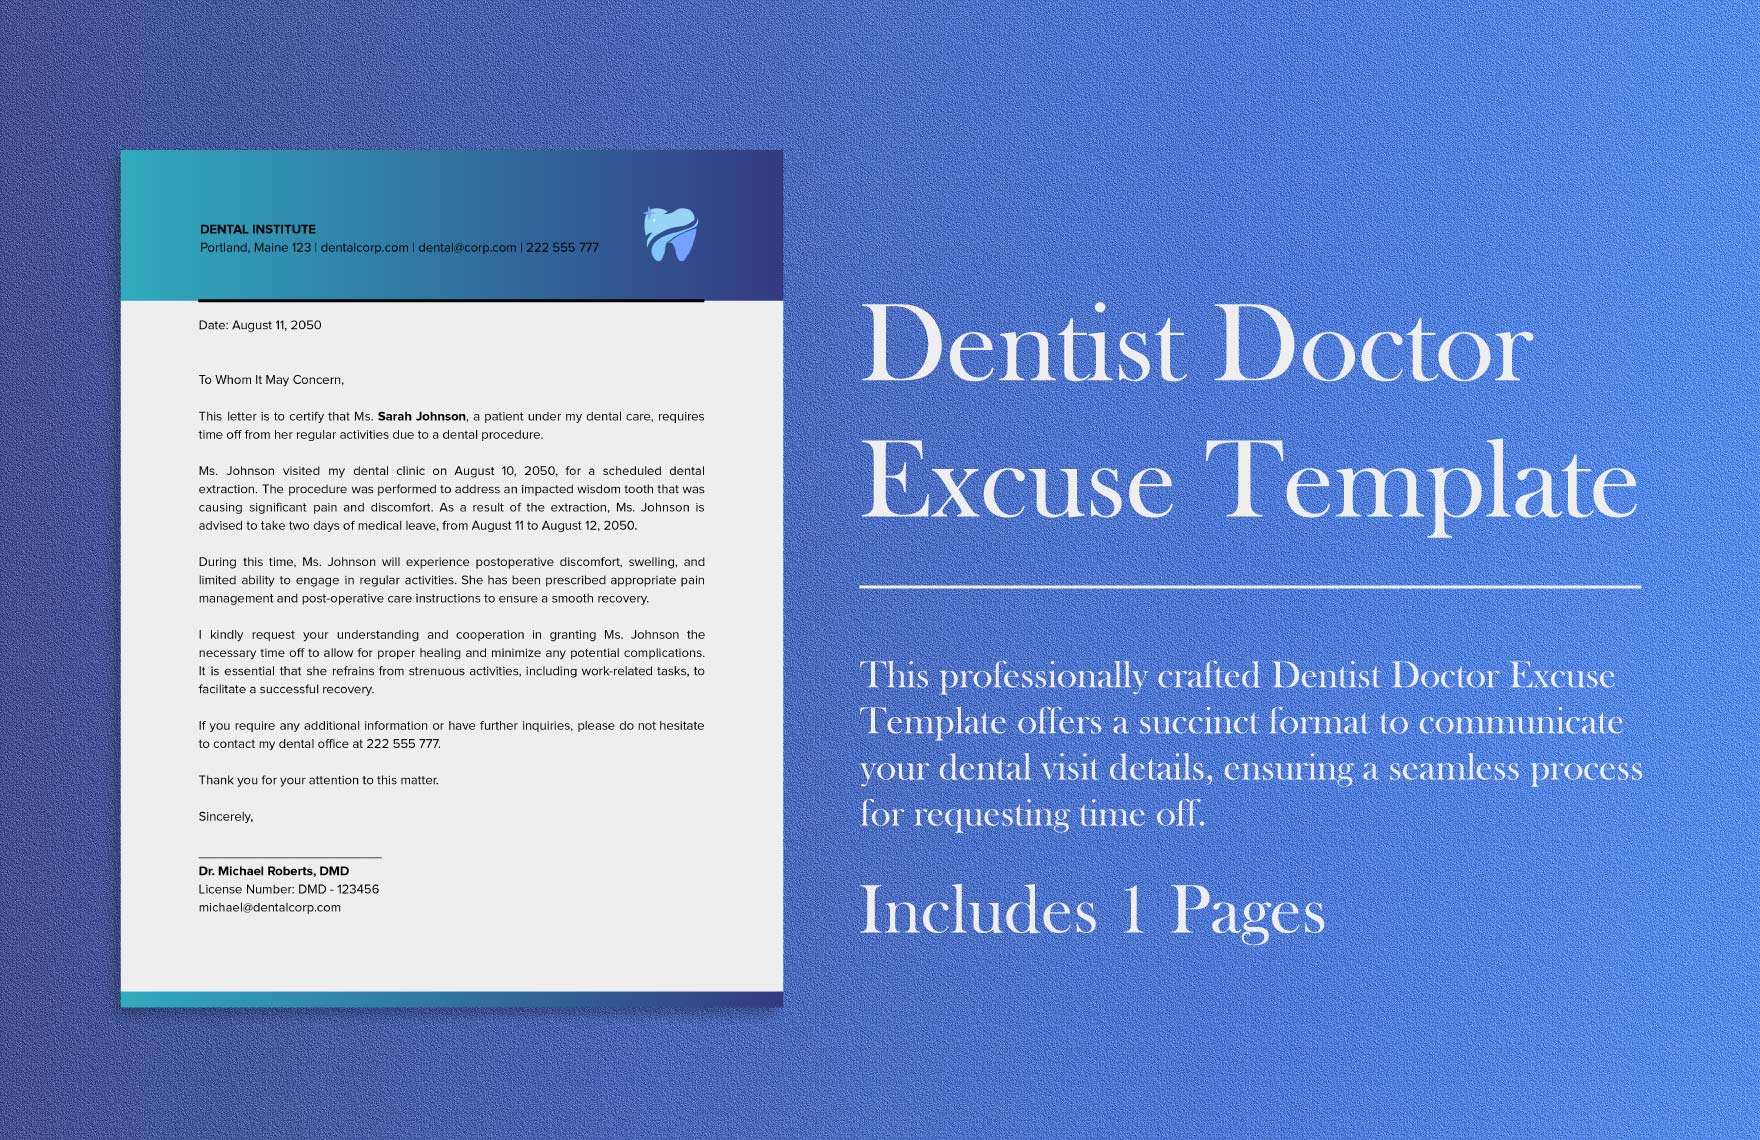 Dentist Doctor Excuse Template